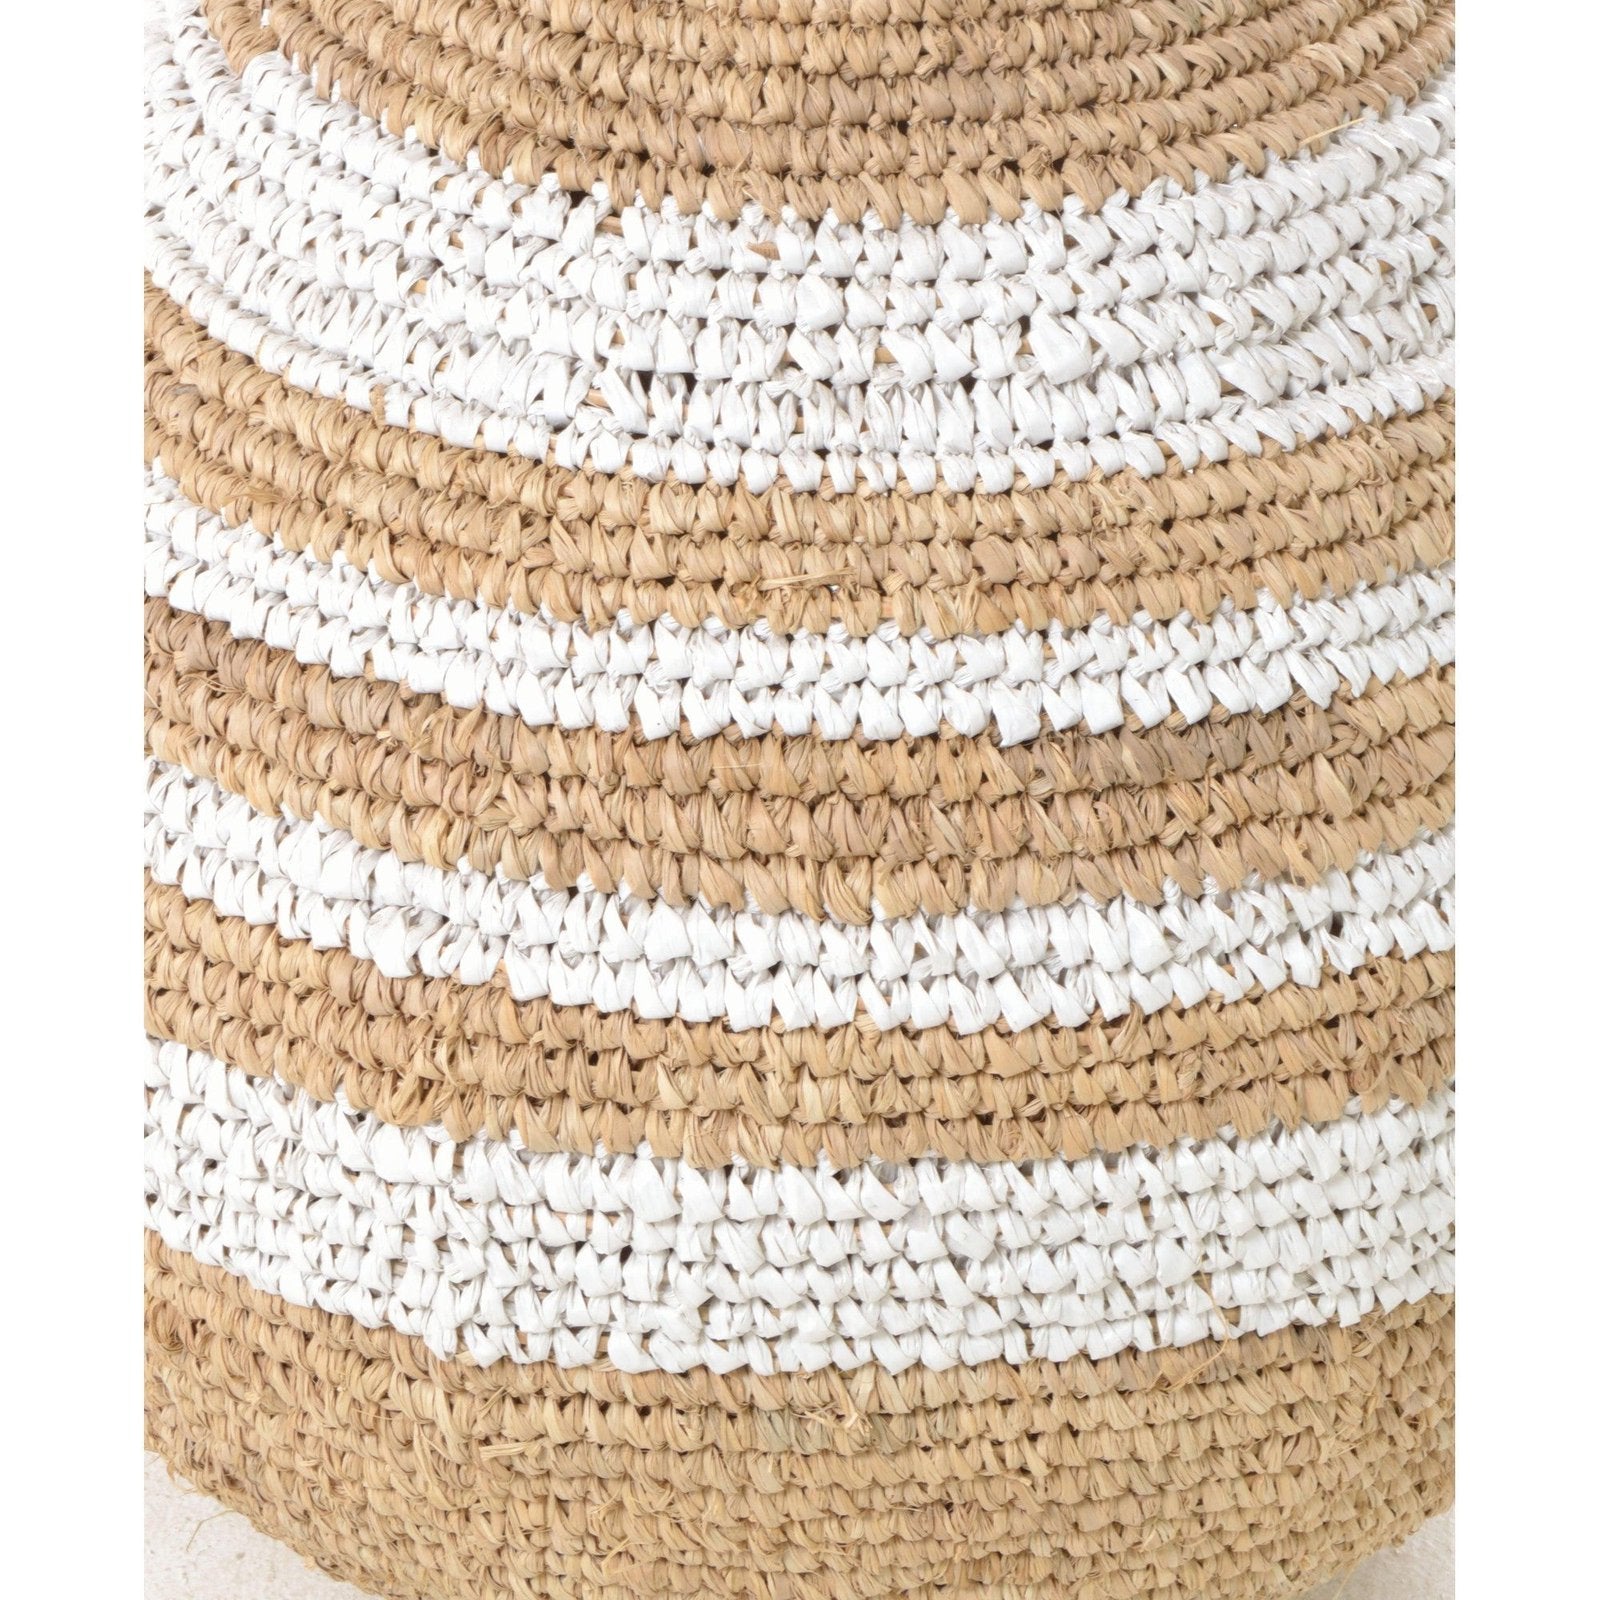 Woven Rounded Striped Basket